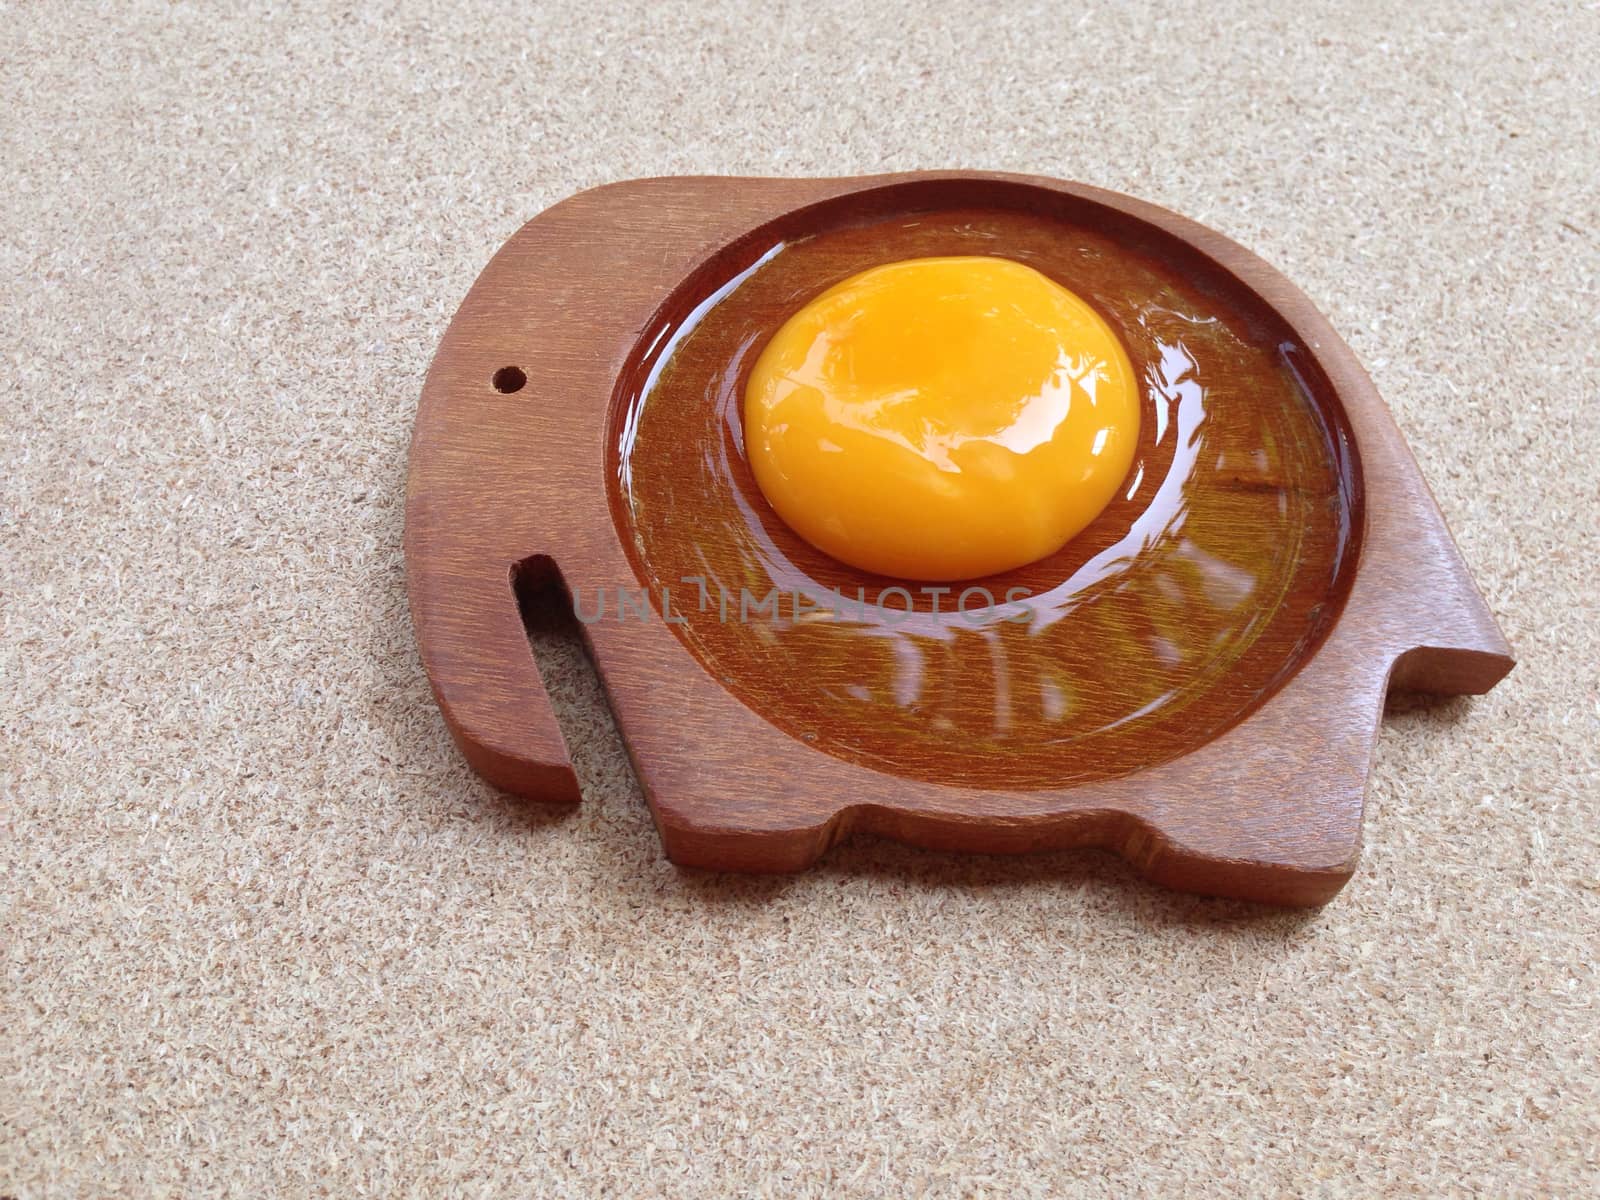 Egg on wooden elephant shaped saucer by Bowonpat